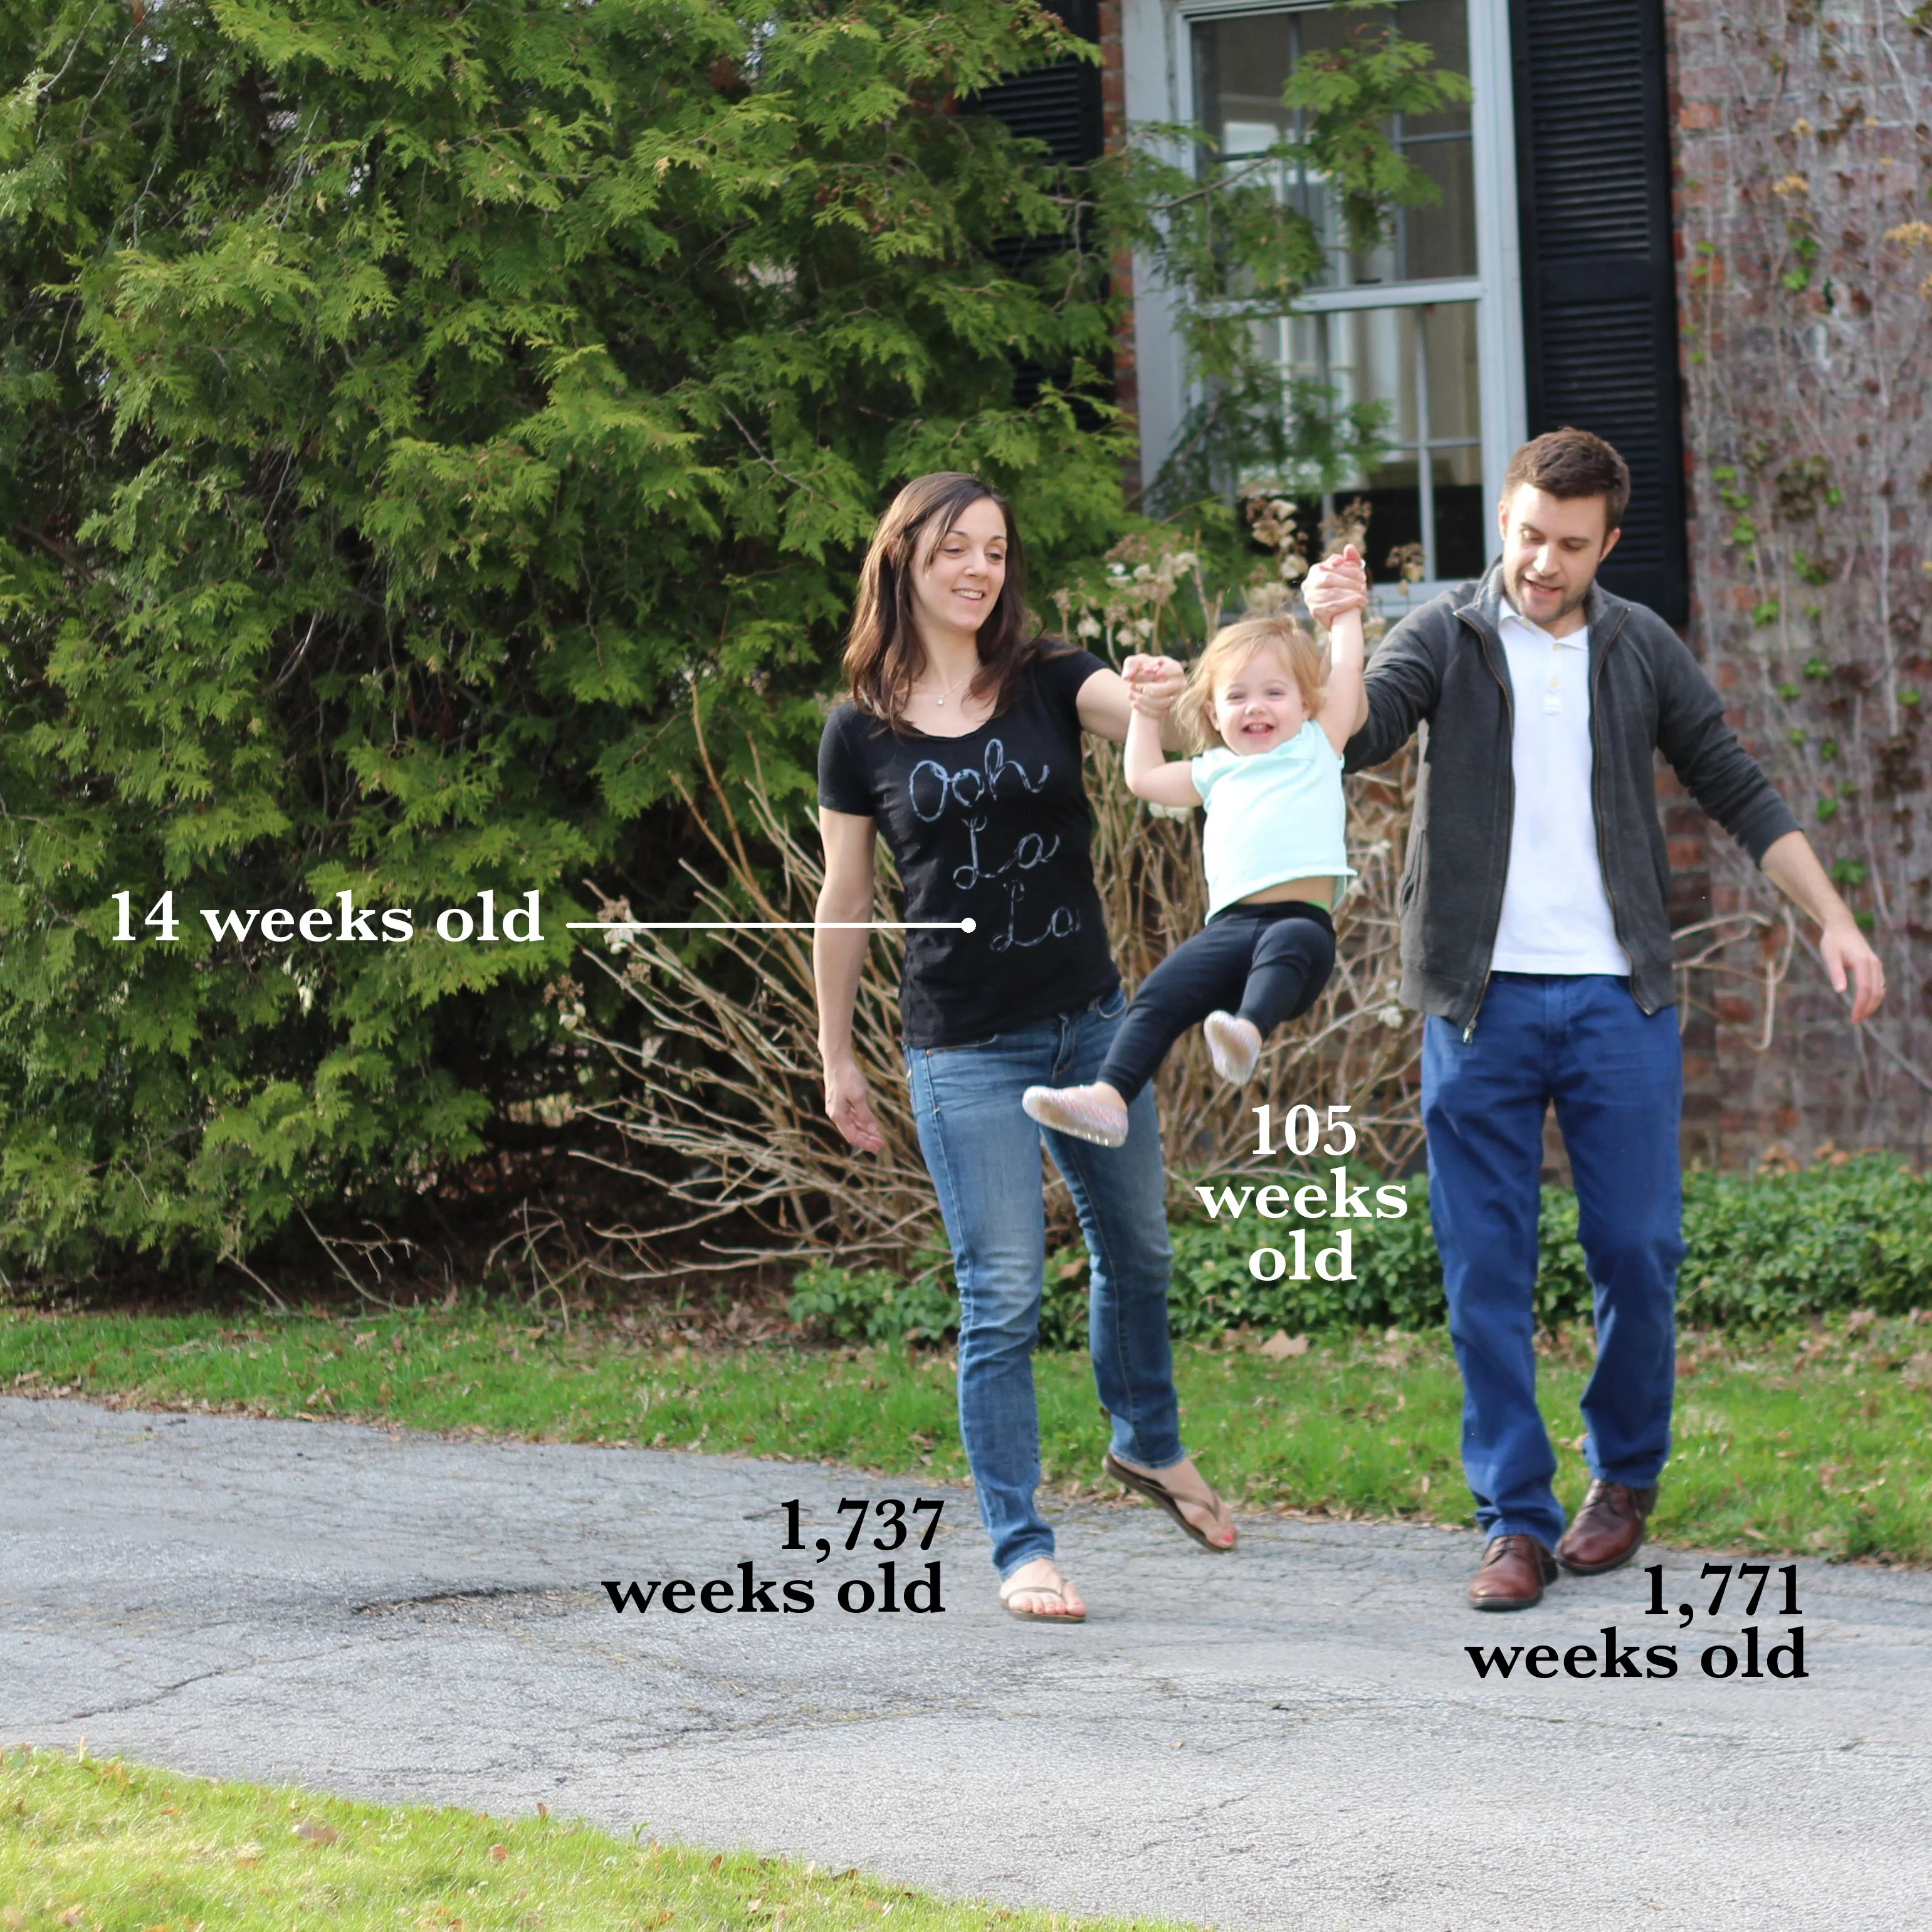 Clever Pregnancy Announcement Idea - Weeks Old